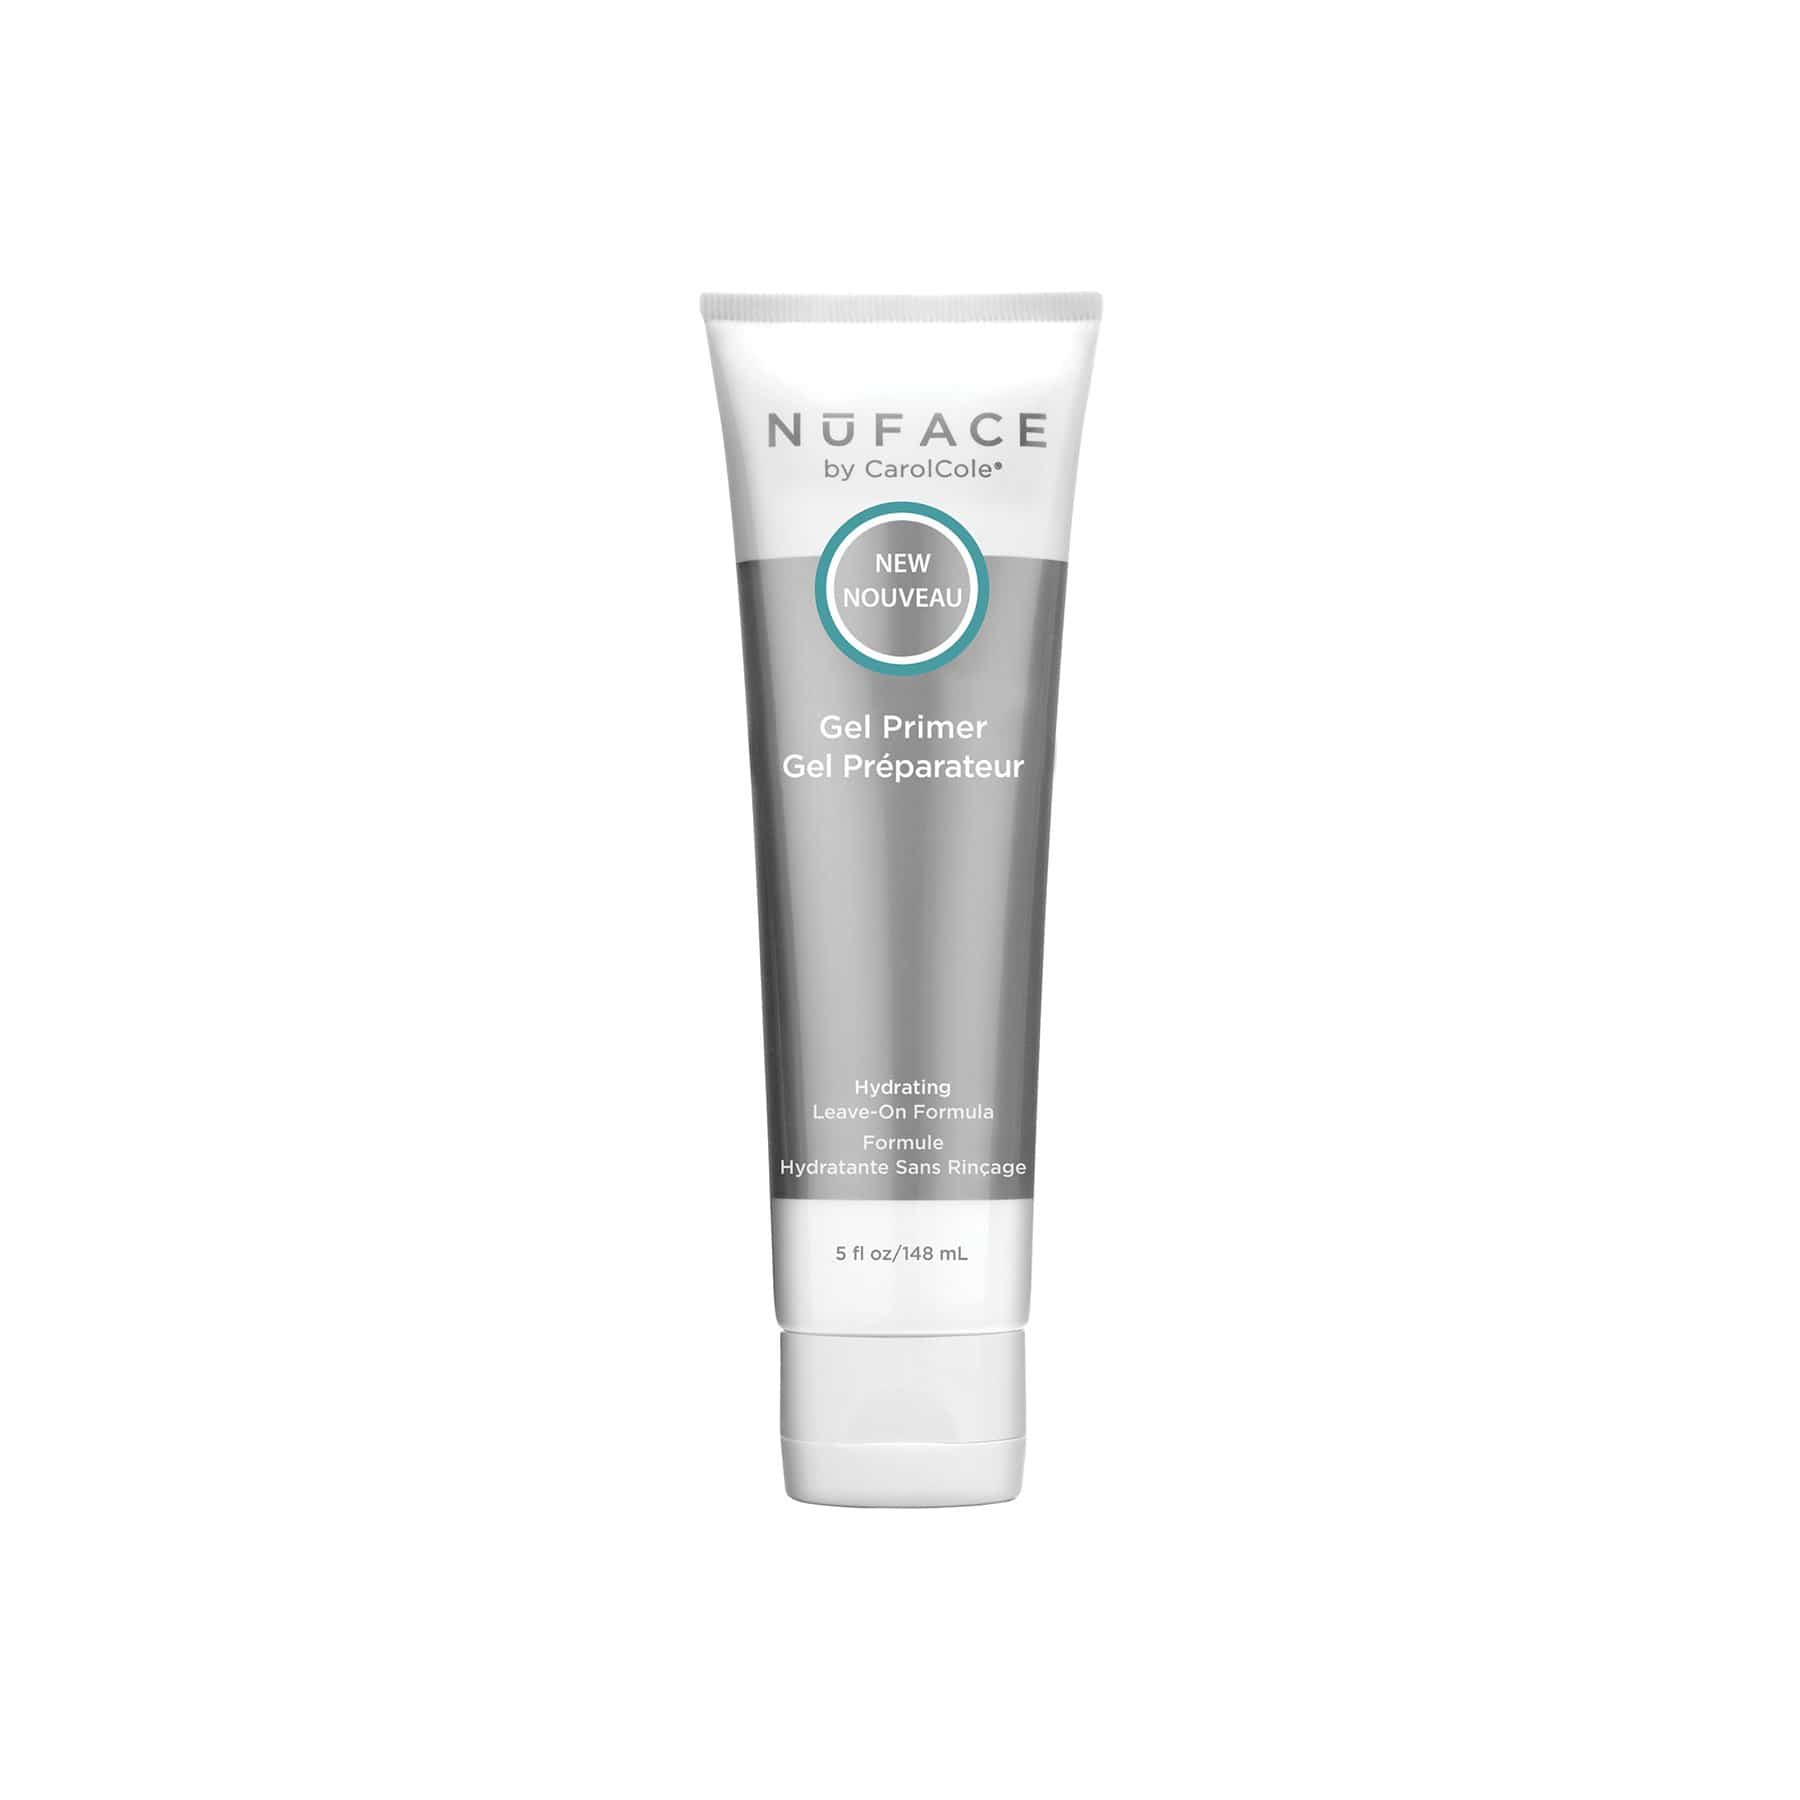 NuFACE Facial Hydrating Leave-On Gel Primer | For Use with NuFACE Devices to Lift Contour Tone Skin + Reduce Look of Wrinkles | FDA-Cleared At-Home System | 2 Fl Oz